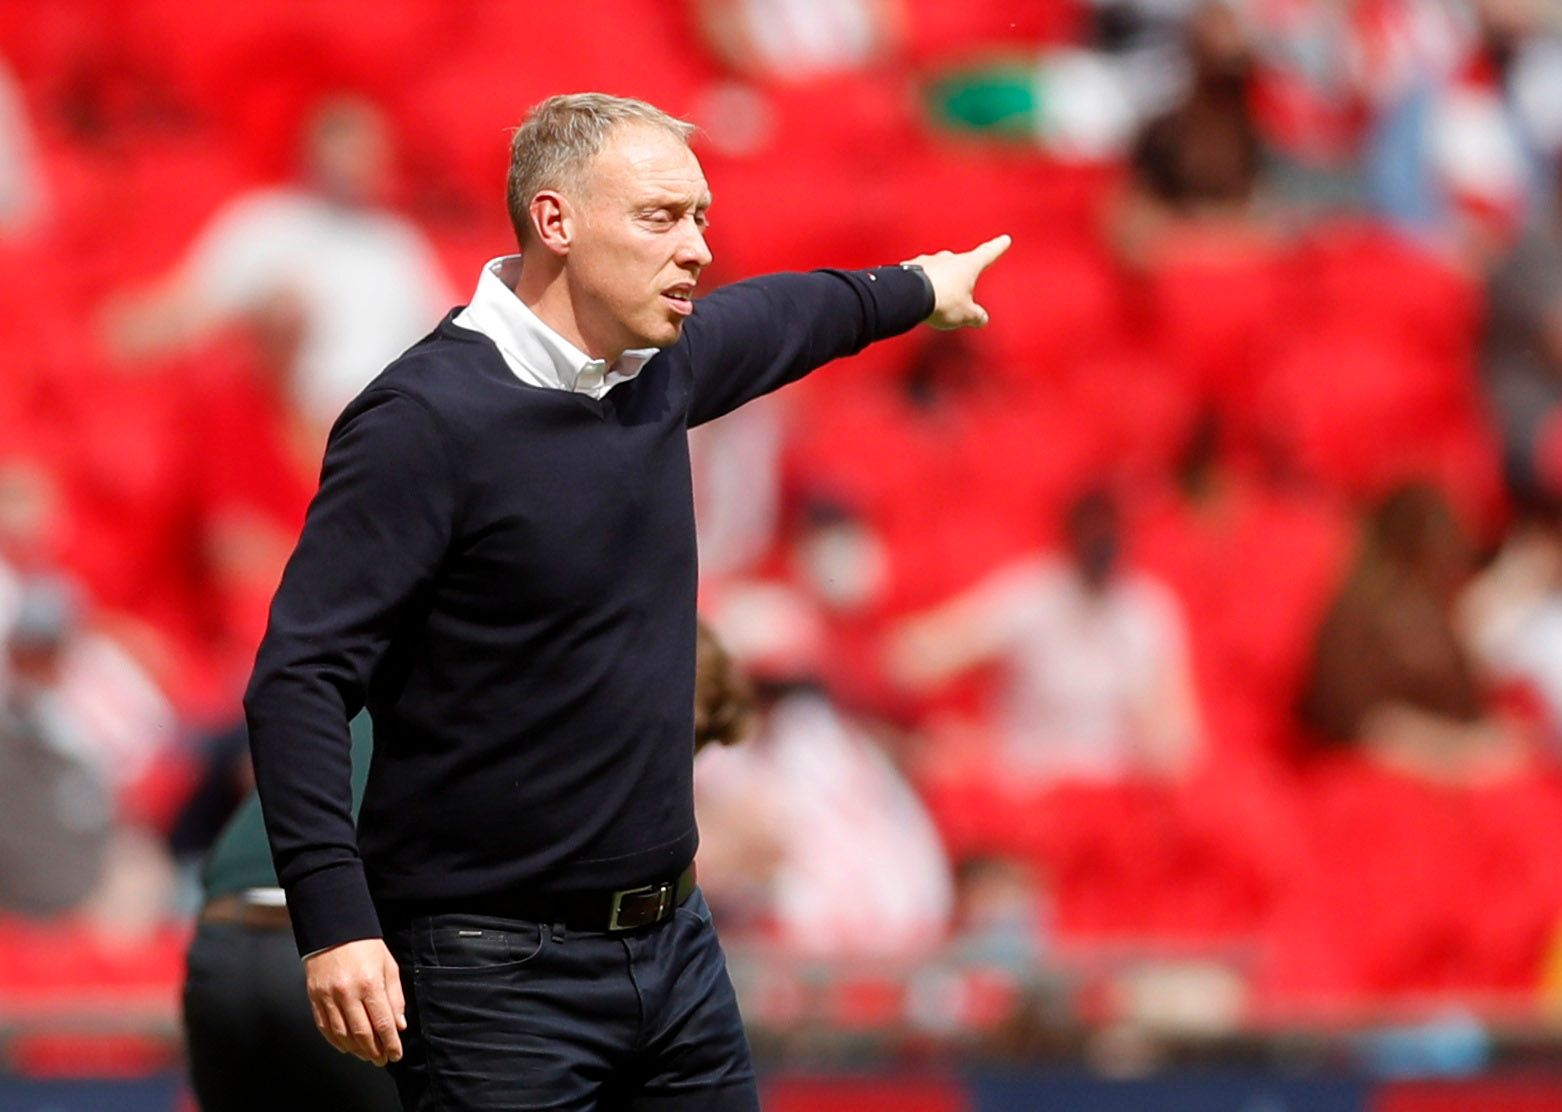 Soccer Football - Championship Play-Off Final - Brentford v Swansea City - Wembley Stadium, London, Britain - May 29, 2021 Swansea City manager Steve Cooper Action Images via Reuters/Matthew Childs